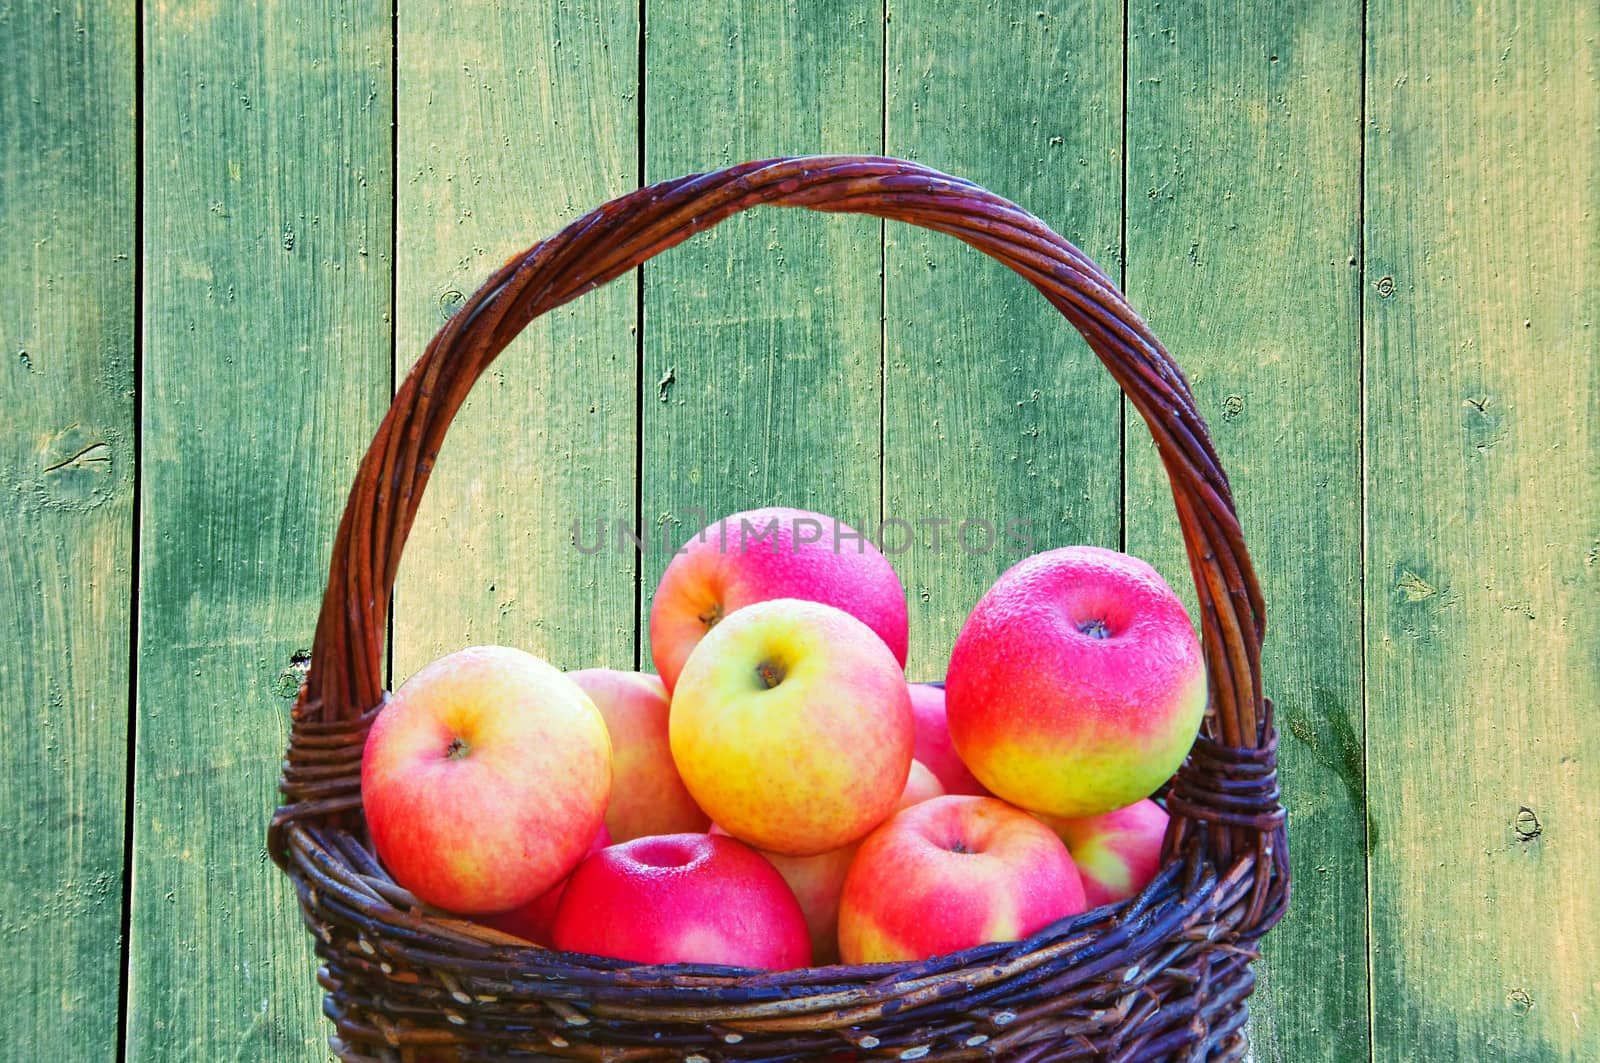 Apples in a basket by GryT